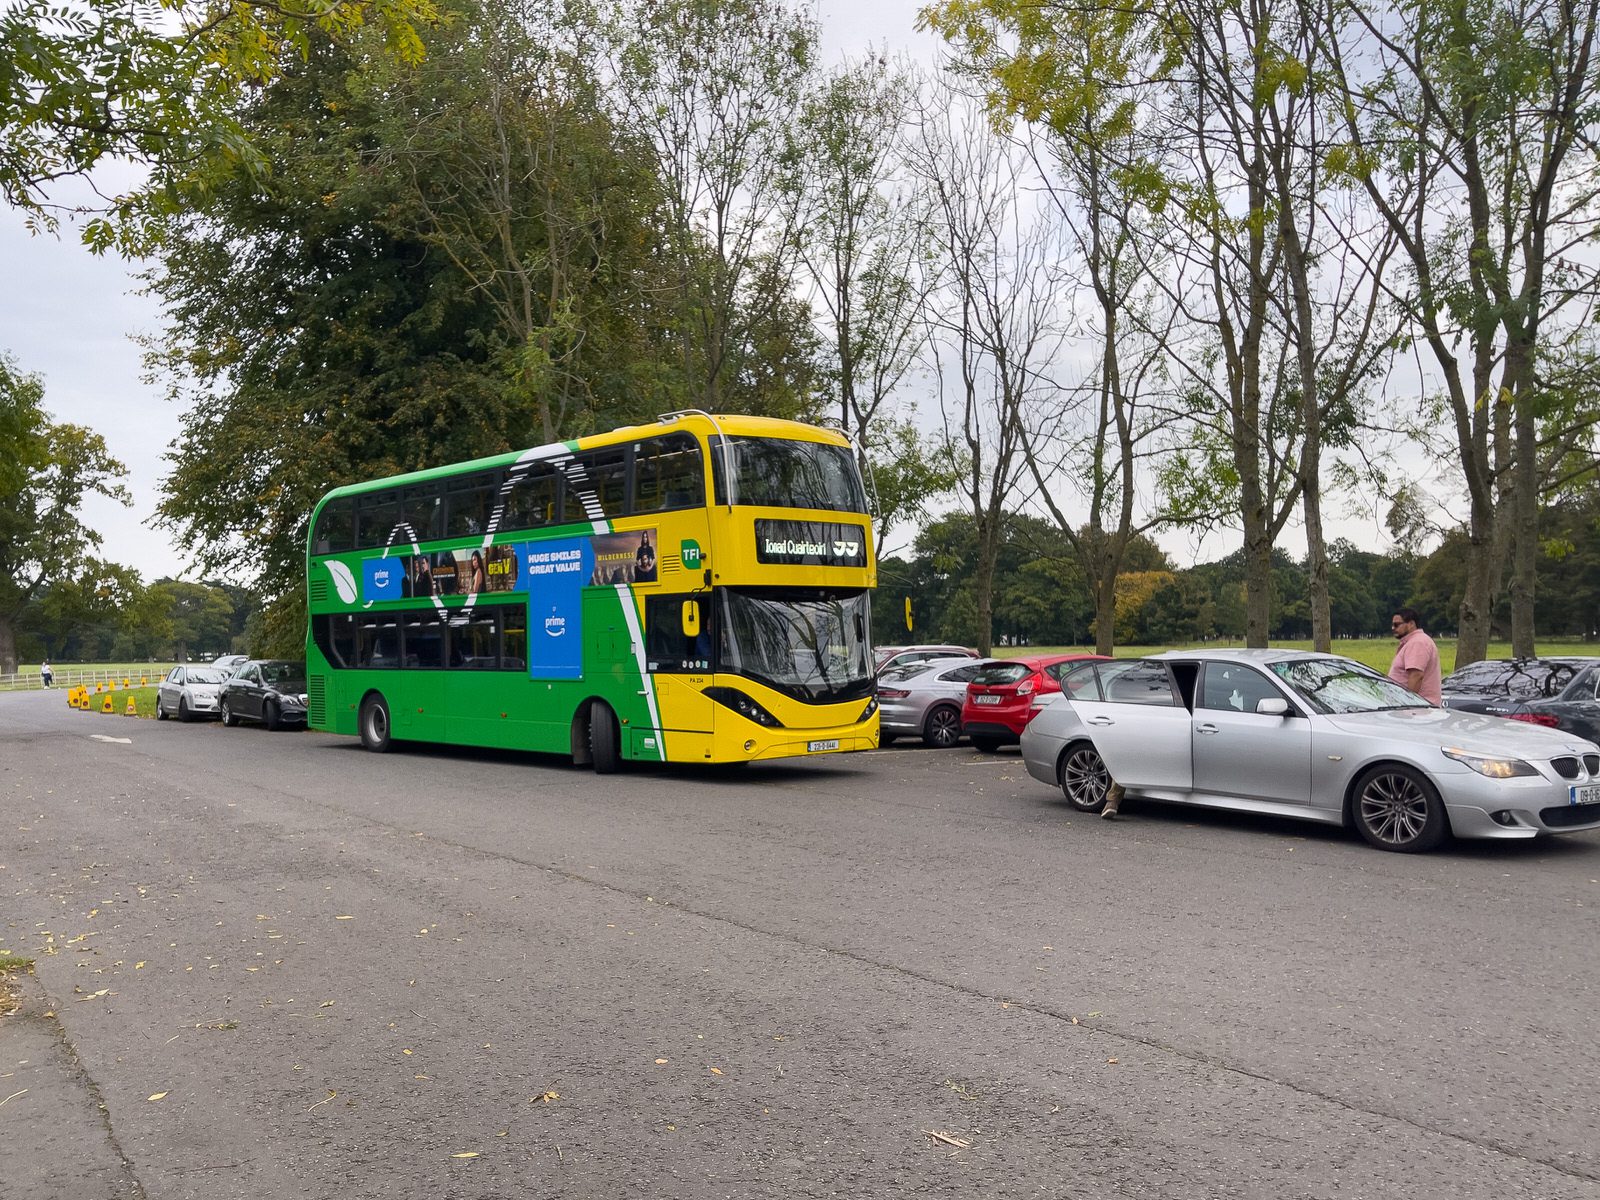 I TRAVELLED BY BUS THE THE PHOENIX PARK VISITOR CENTRE [NEW 99 BUS SERVICED LAUNCHED 8 OCTOBER 2023] 002